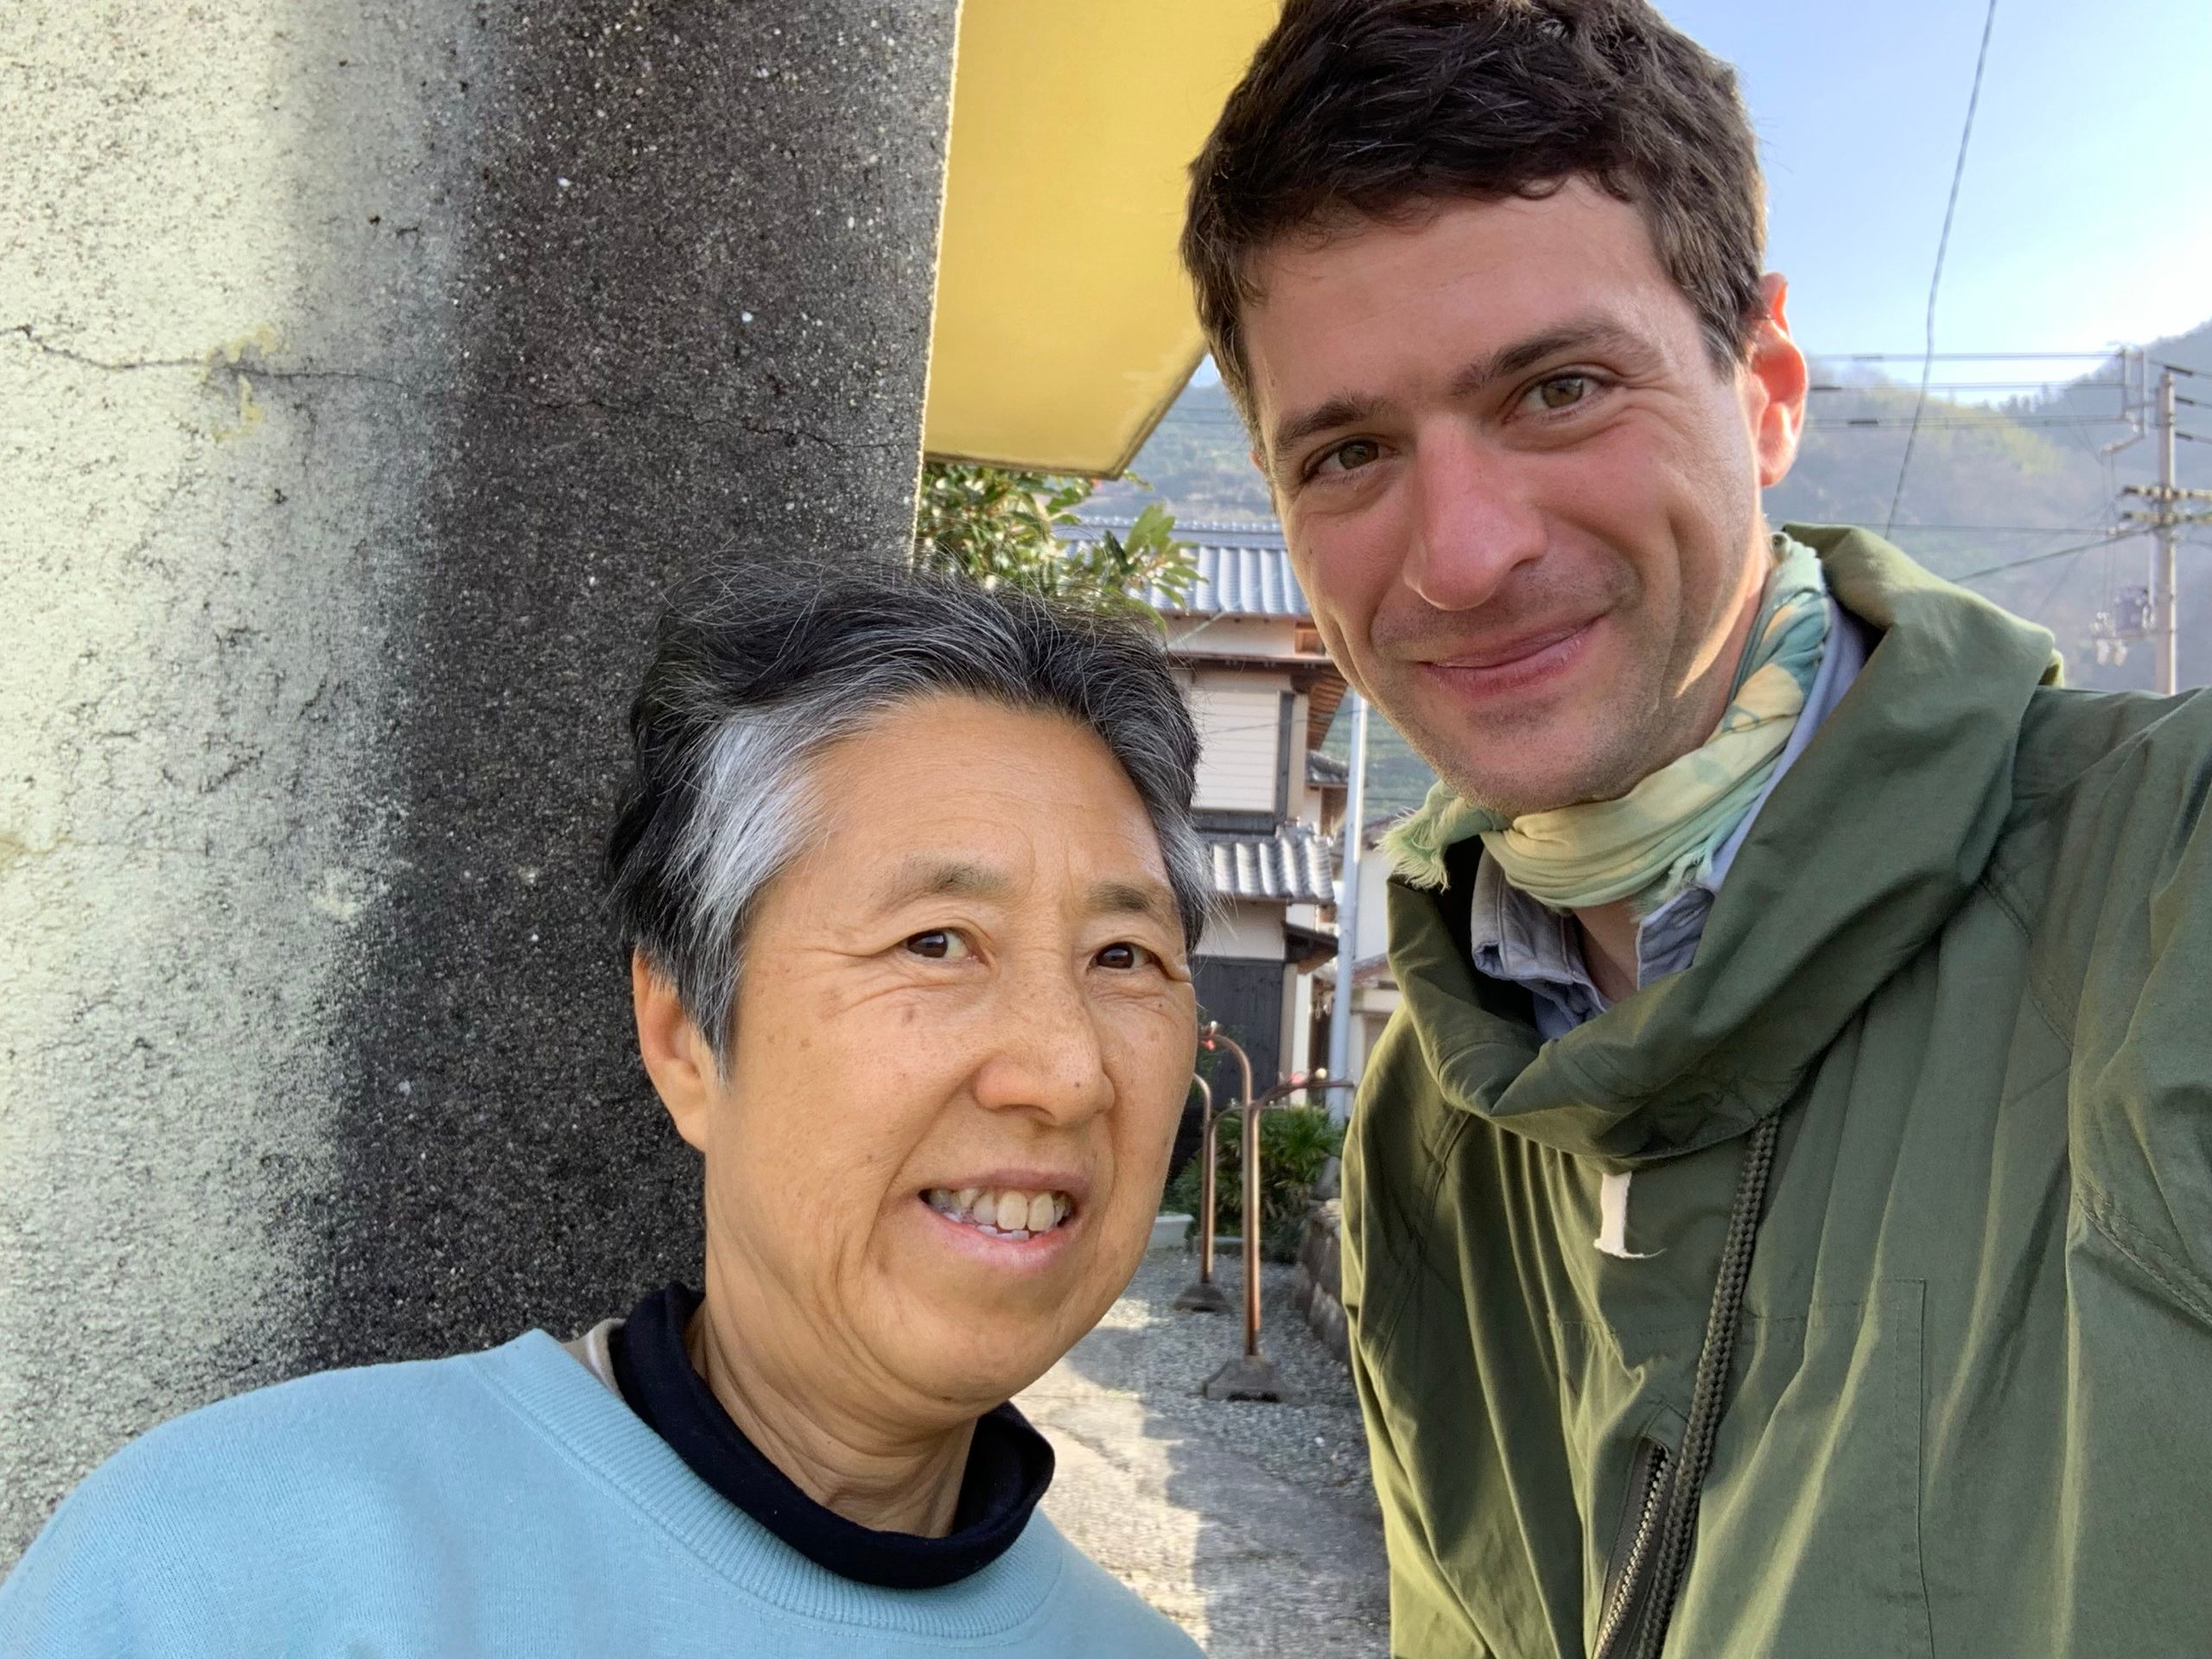 A Japanese woman and a much taller European man, the author, pose for the camera.